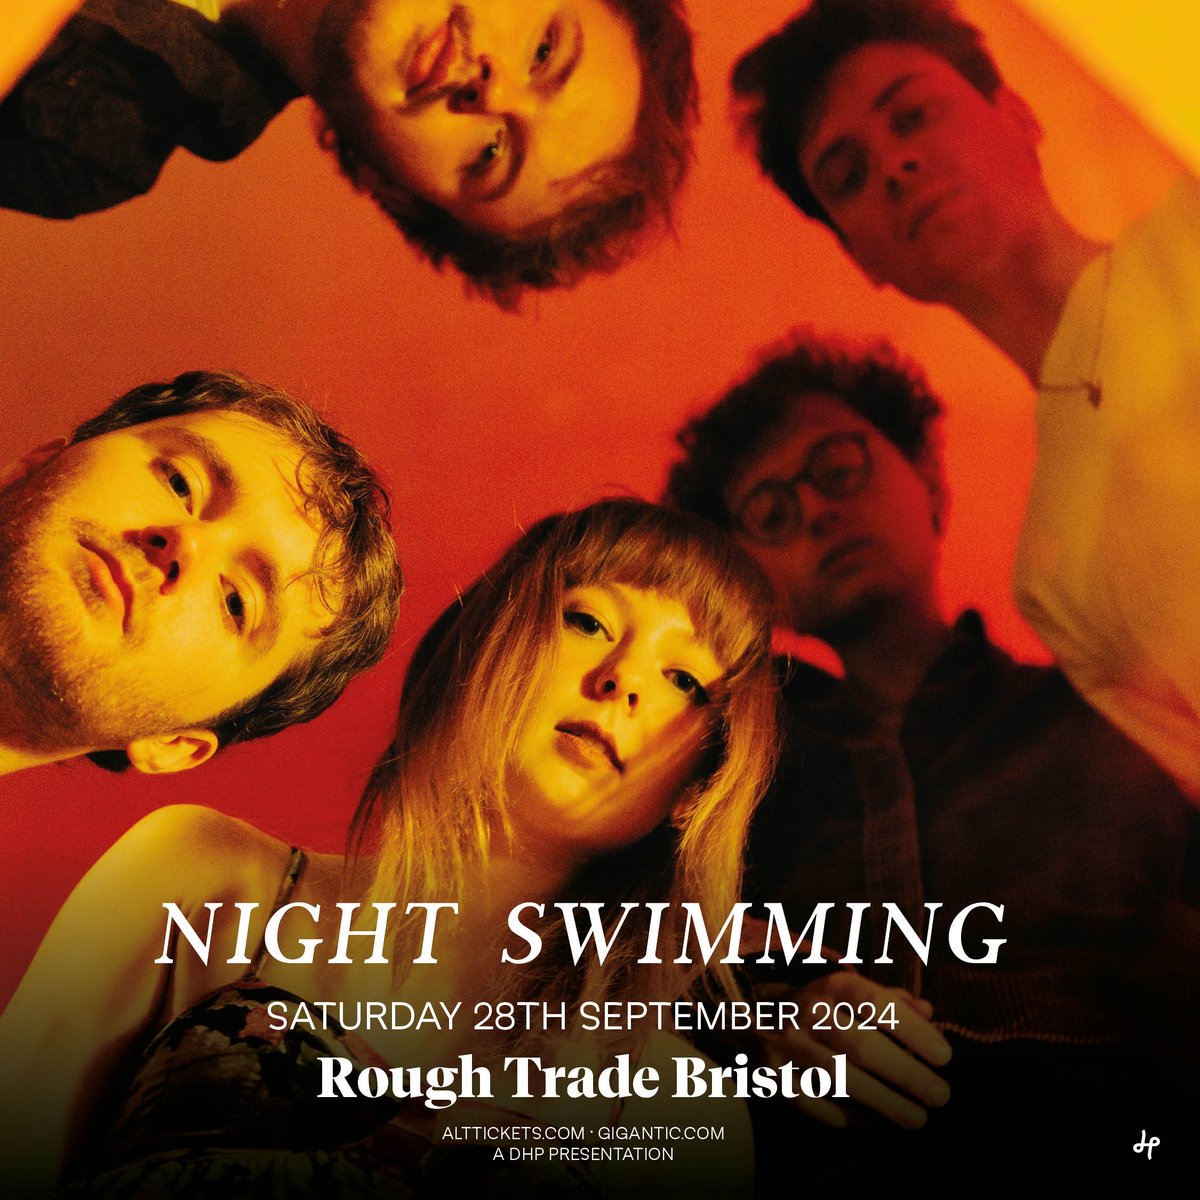 Dream pop band @nightsswimming have just announced they are bringing their ethereal and melodic sounds to Bristol for a show at Rough Trade on Saturday 28thSeptember! Tickets are on sale from Friday at 10am, set a reminder: tinyurl.com/yc6xez8u